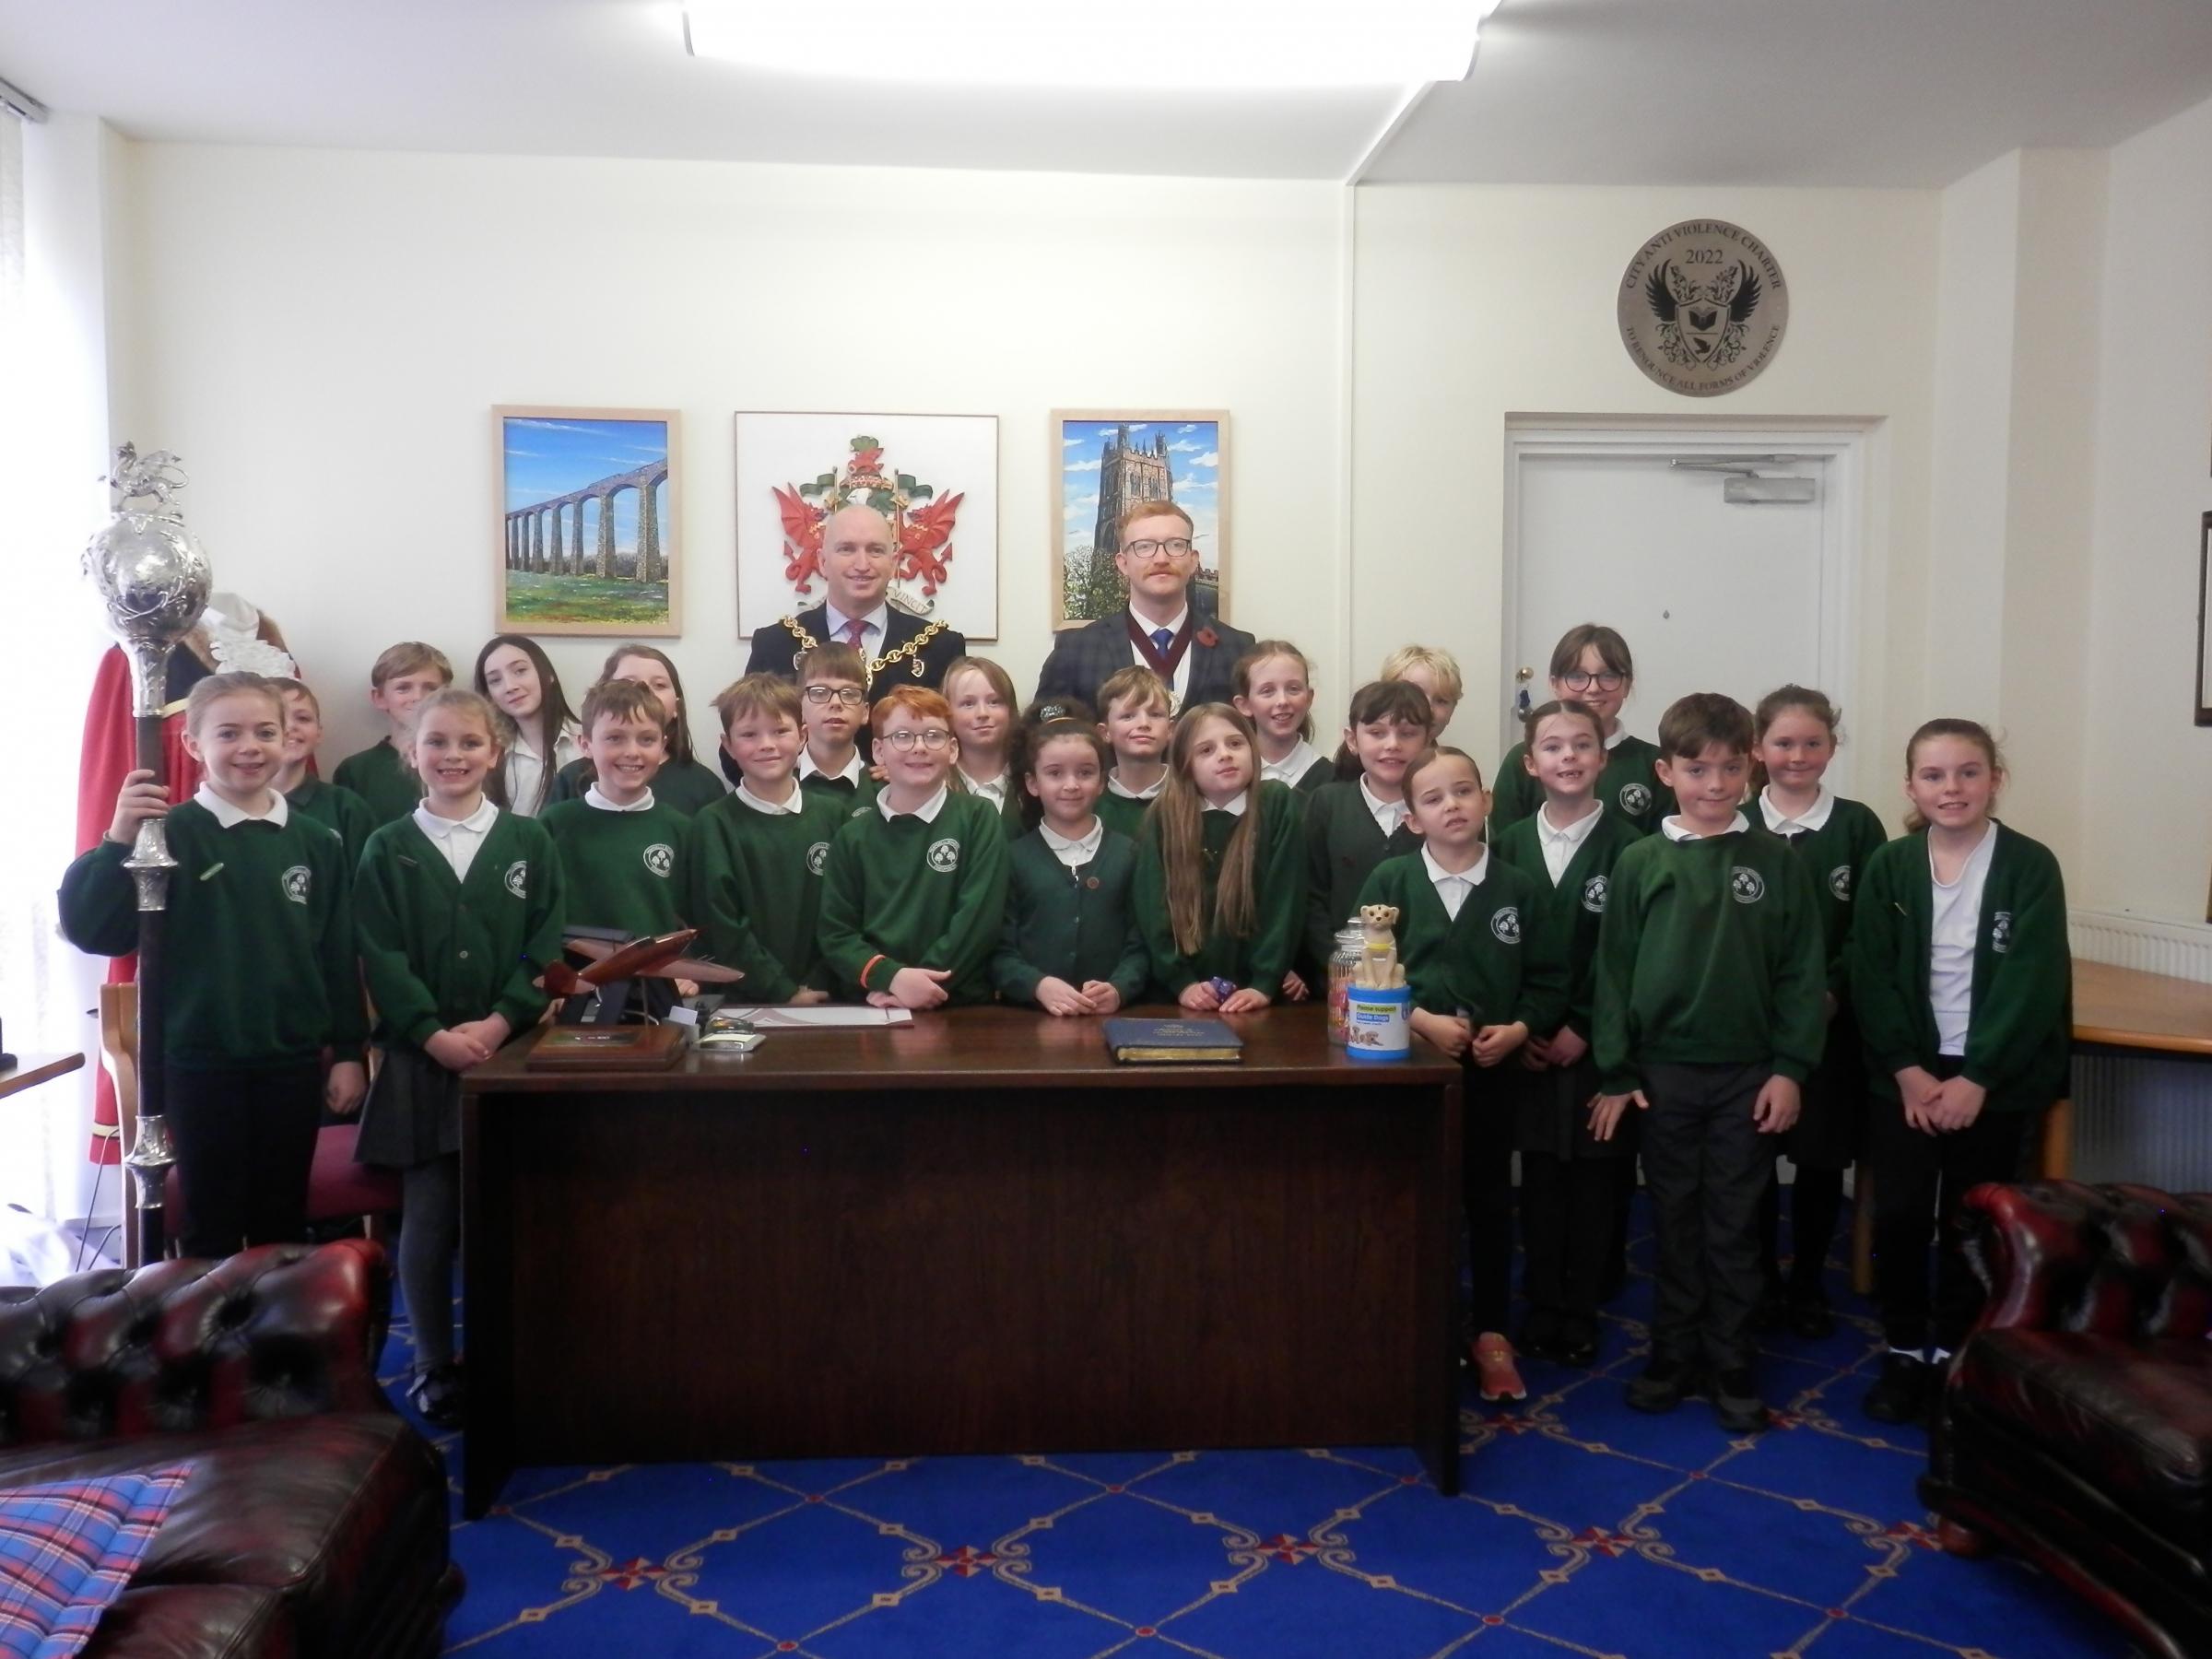 Ysgol Penygelli pupils visit to the Guildhall Wrexham, with Mayory Cllr Andy Williams, and consort Luke Williams.